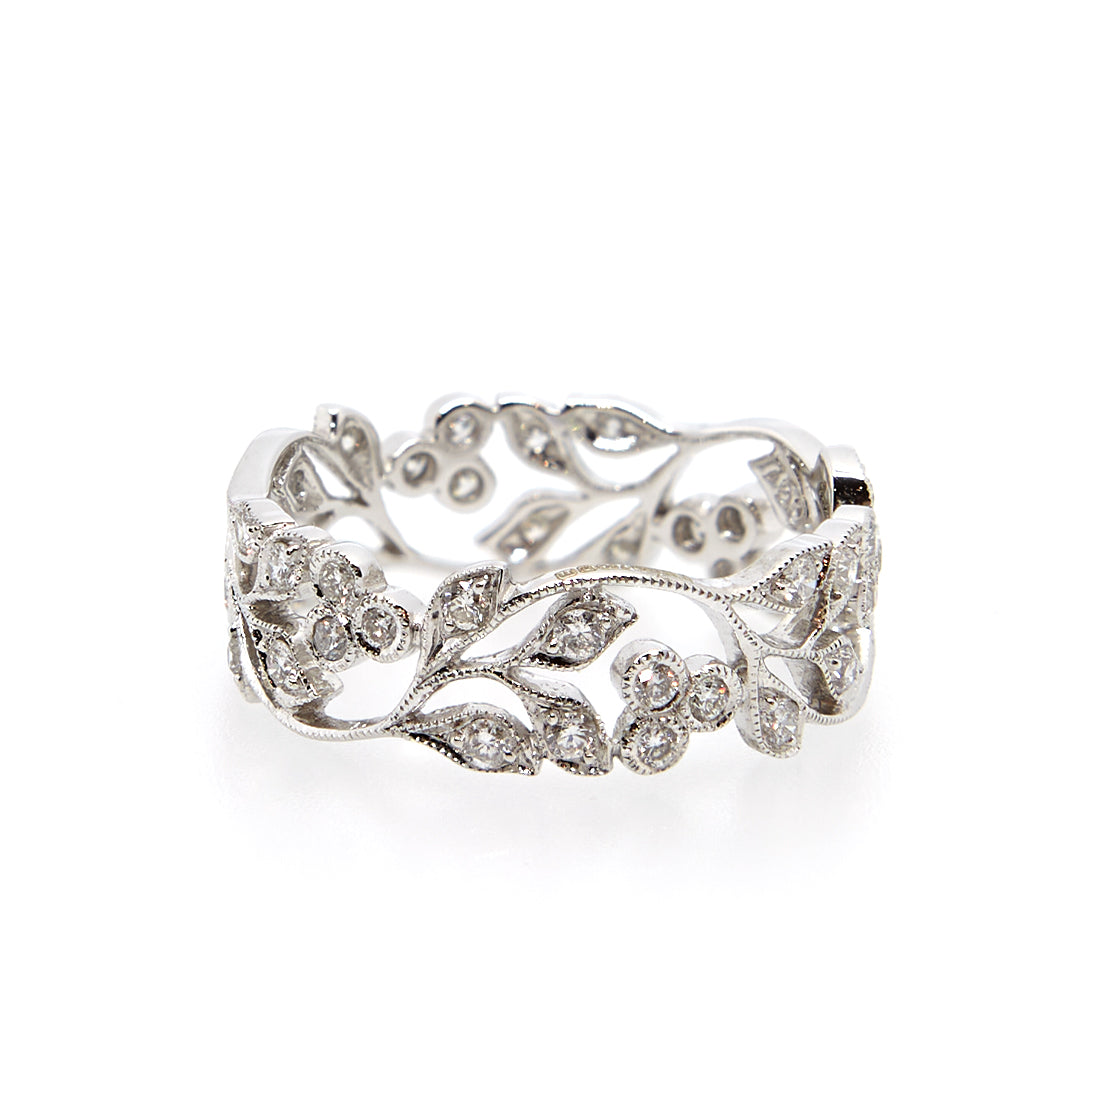 White gold ring with diamonds set in leaf-shaped motifs. 